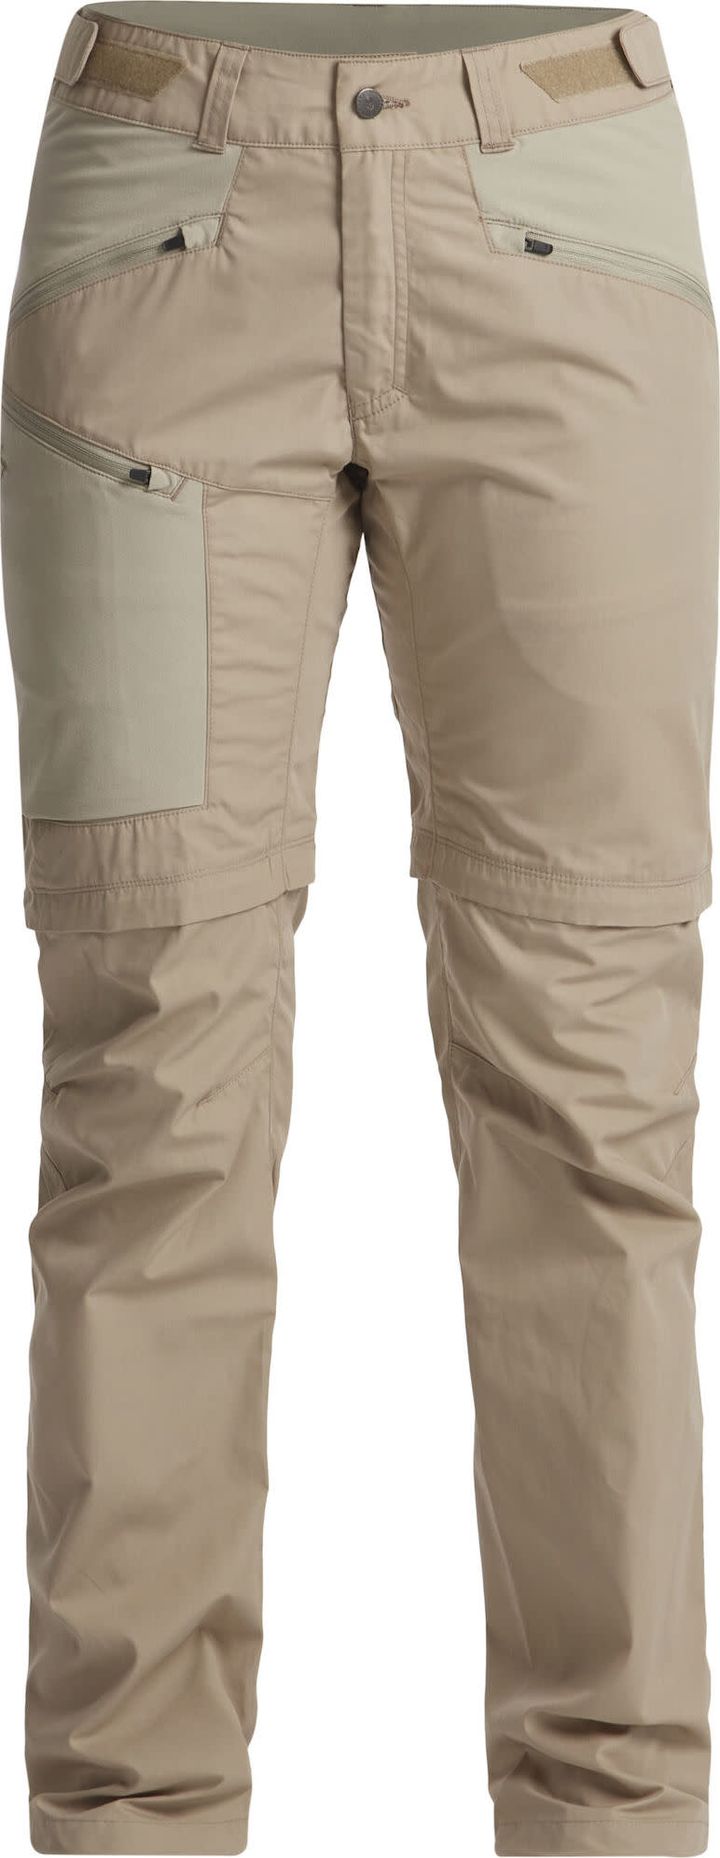 Men's Tived Zip-Off Pant  Sand Lundhags